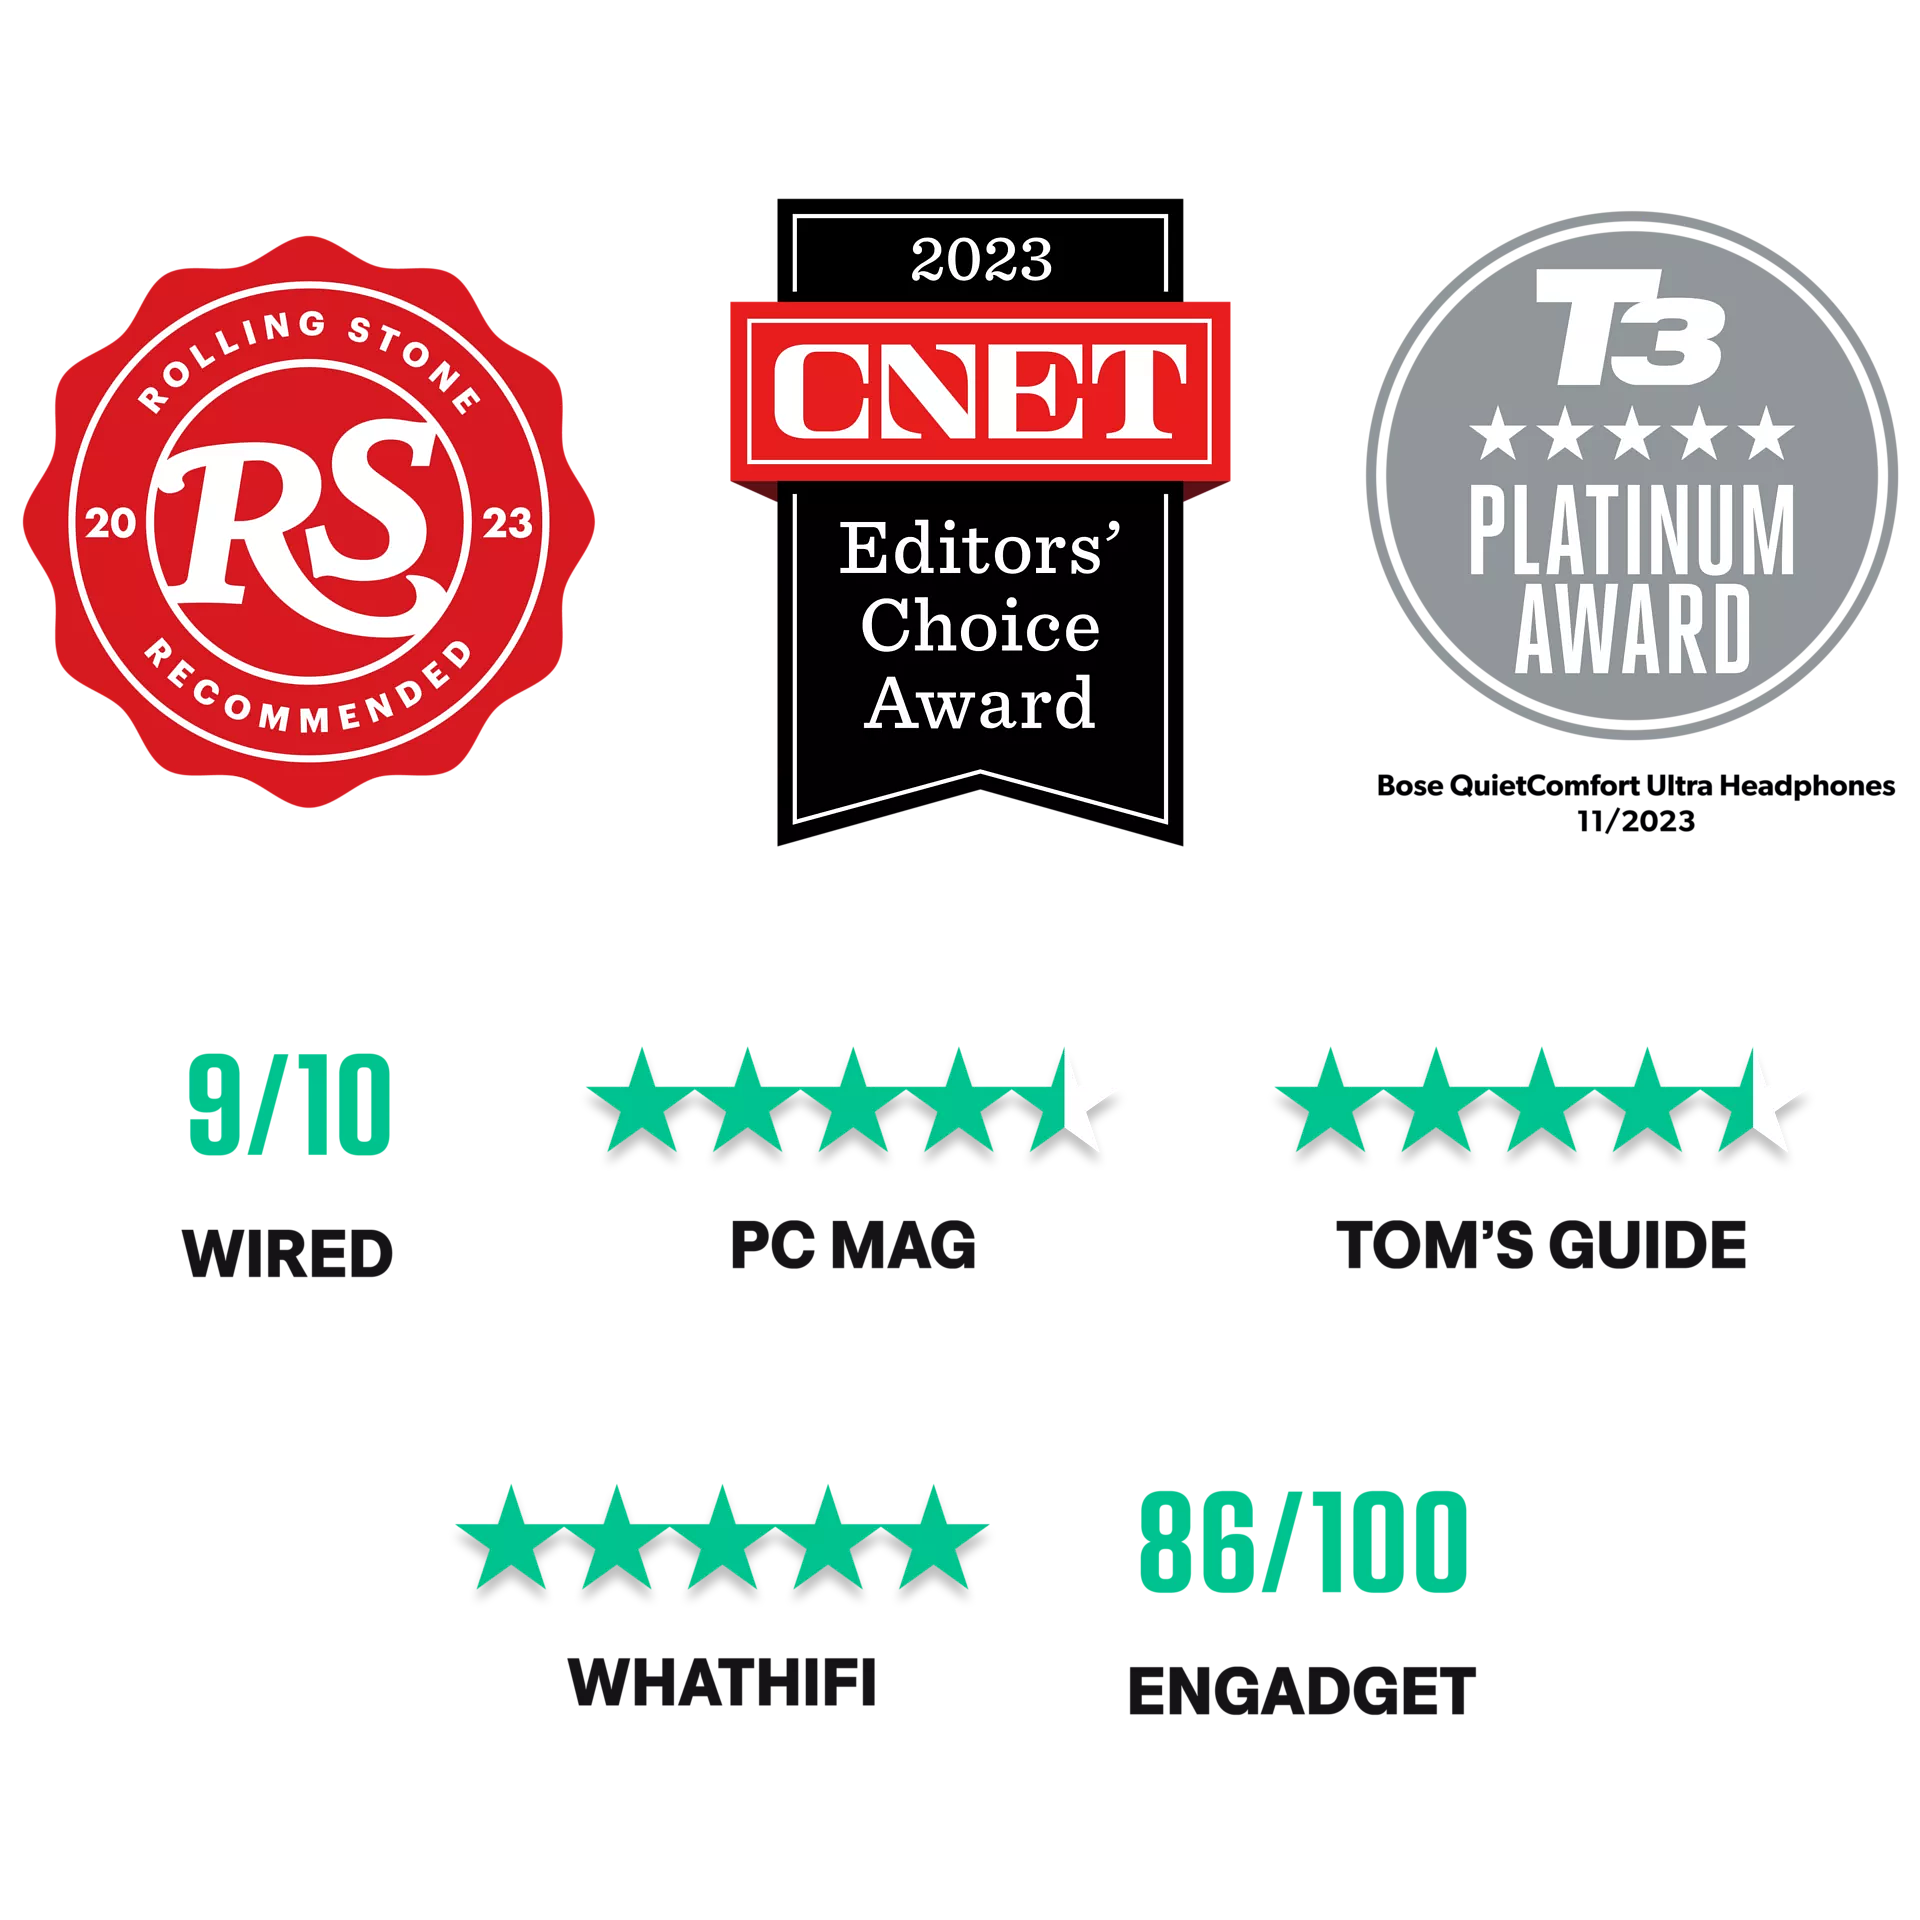 Rolling Stone Recommended 2023 badge, CNET Editors' Choice Award 2023 badge, T3 five-star Platinum Award 11/2023 badge, Wired 9/10 rating, PC Mag 4.5/5 stars, Tom's Guide 4.5/5 stars, What HiFi 5/5 stars, Engadget 86/100 rating